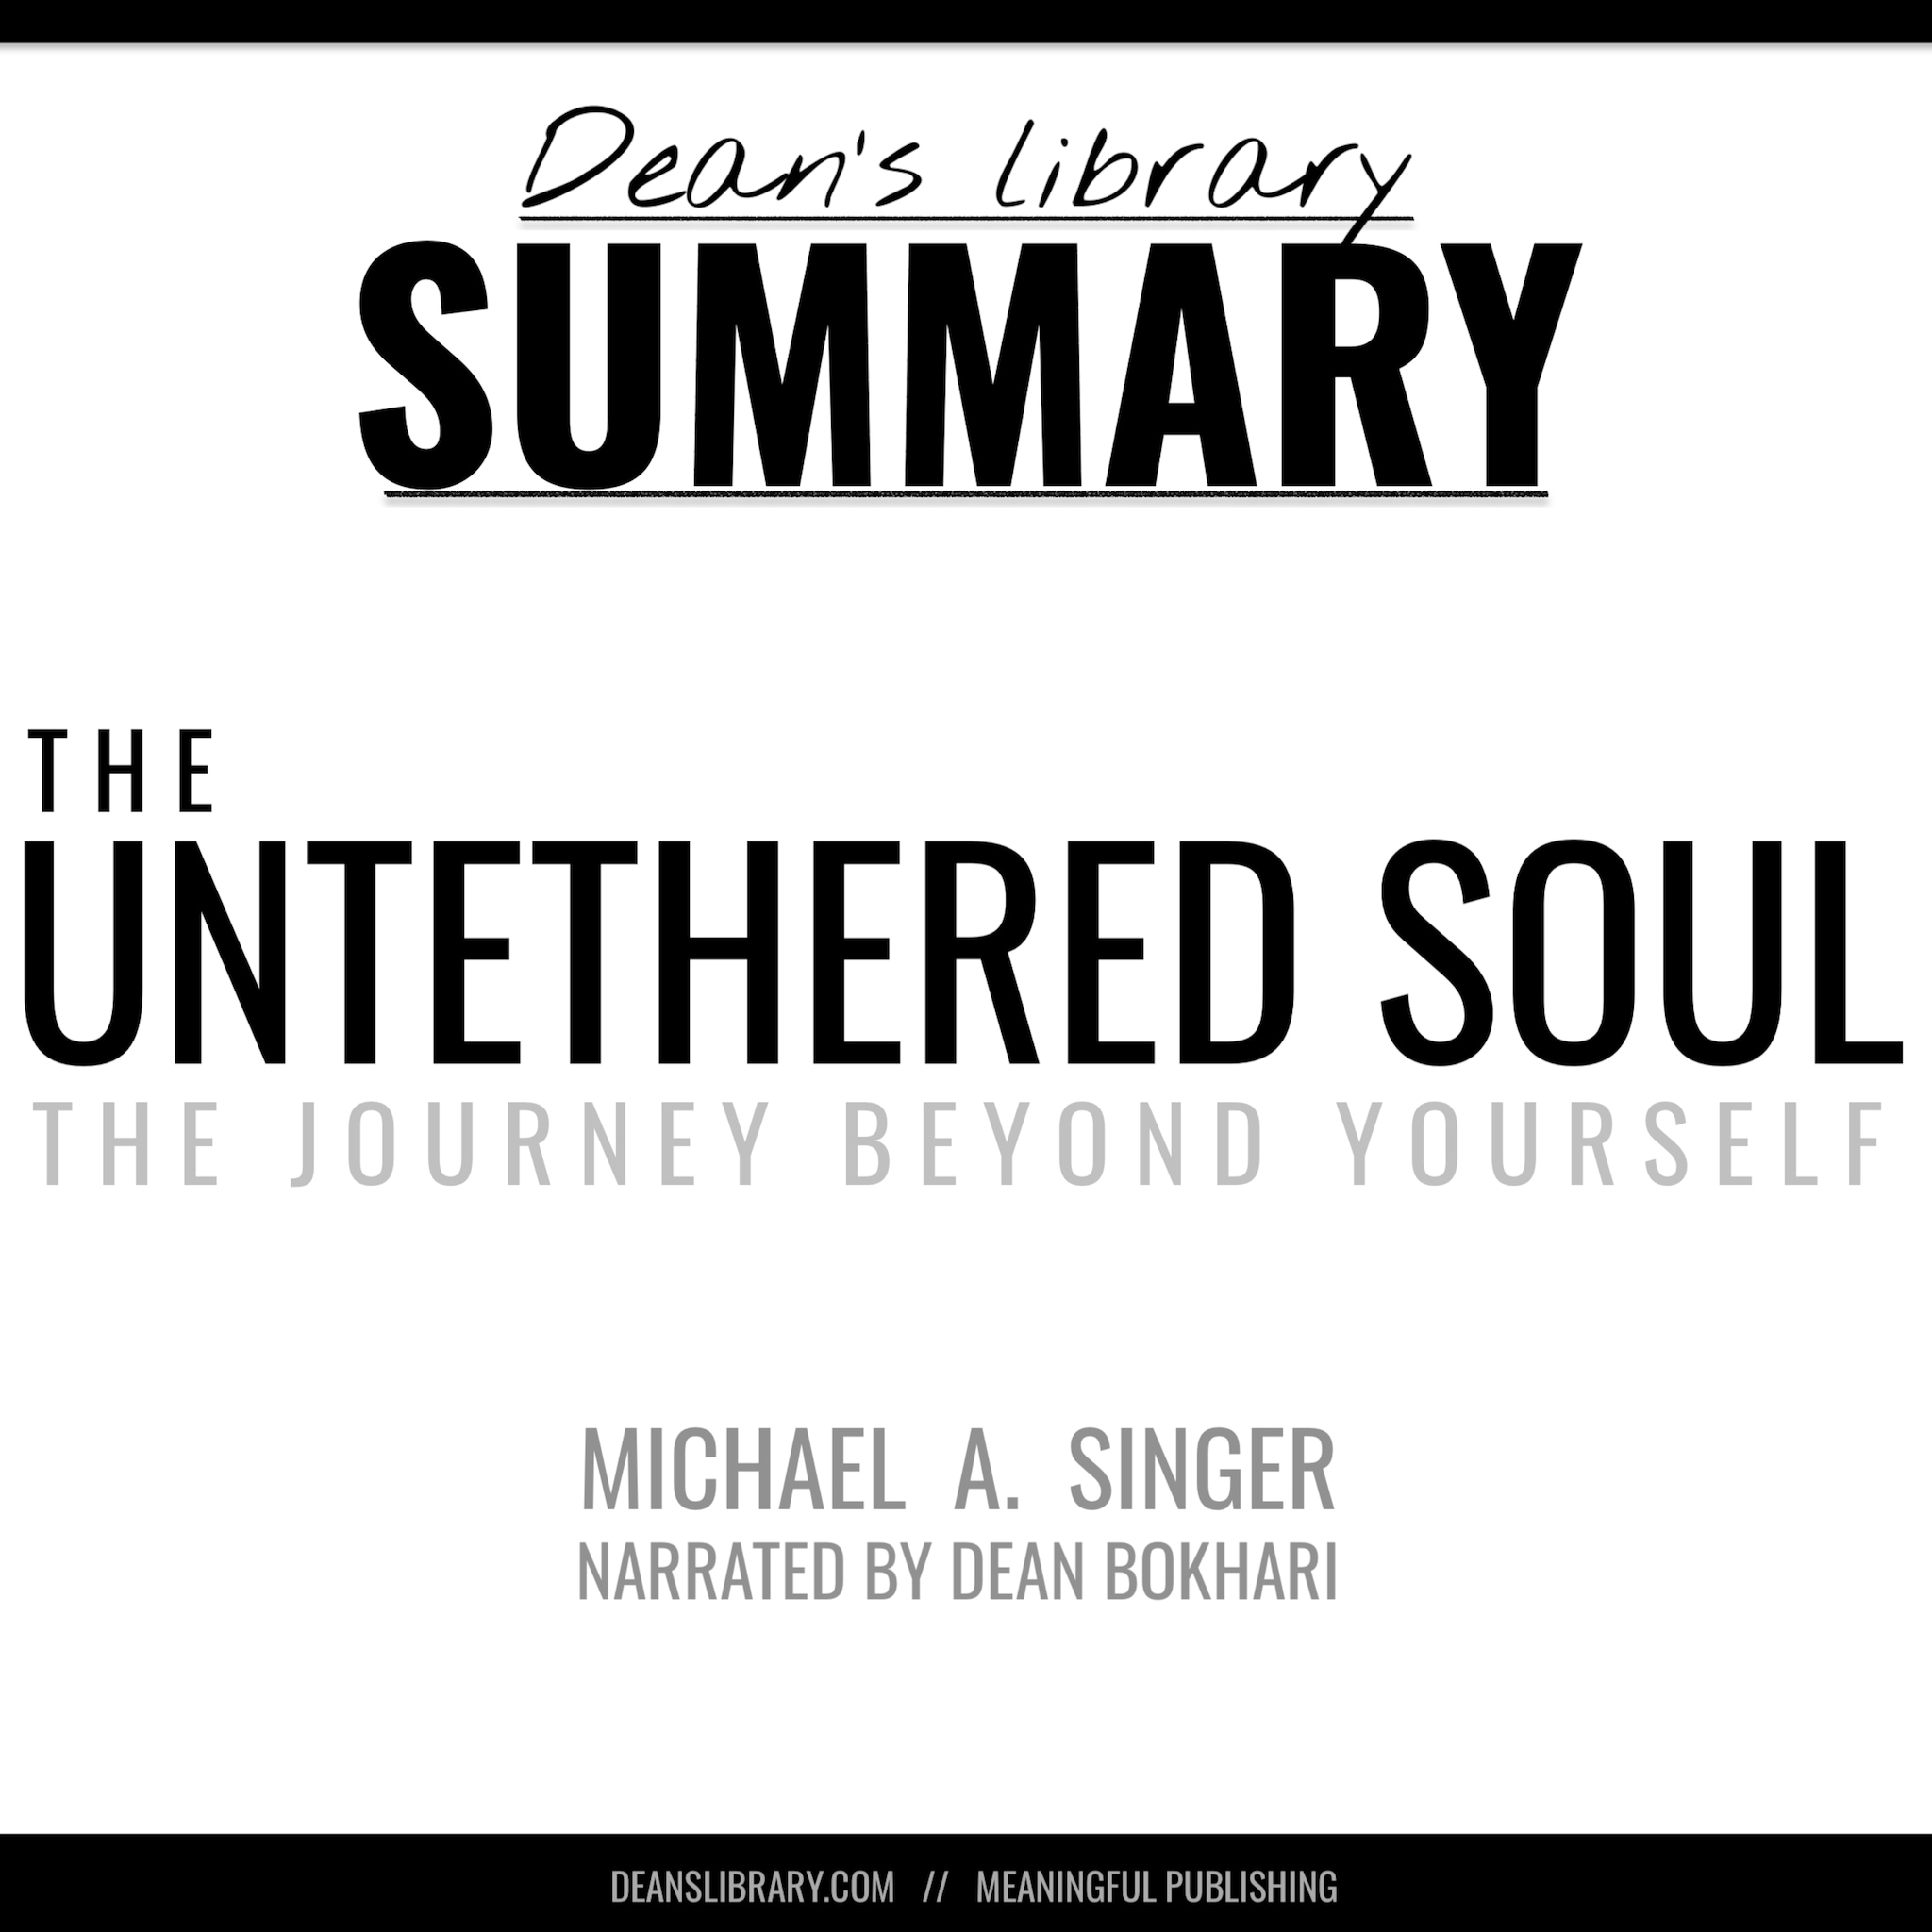 michael singer the untethered soul